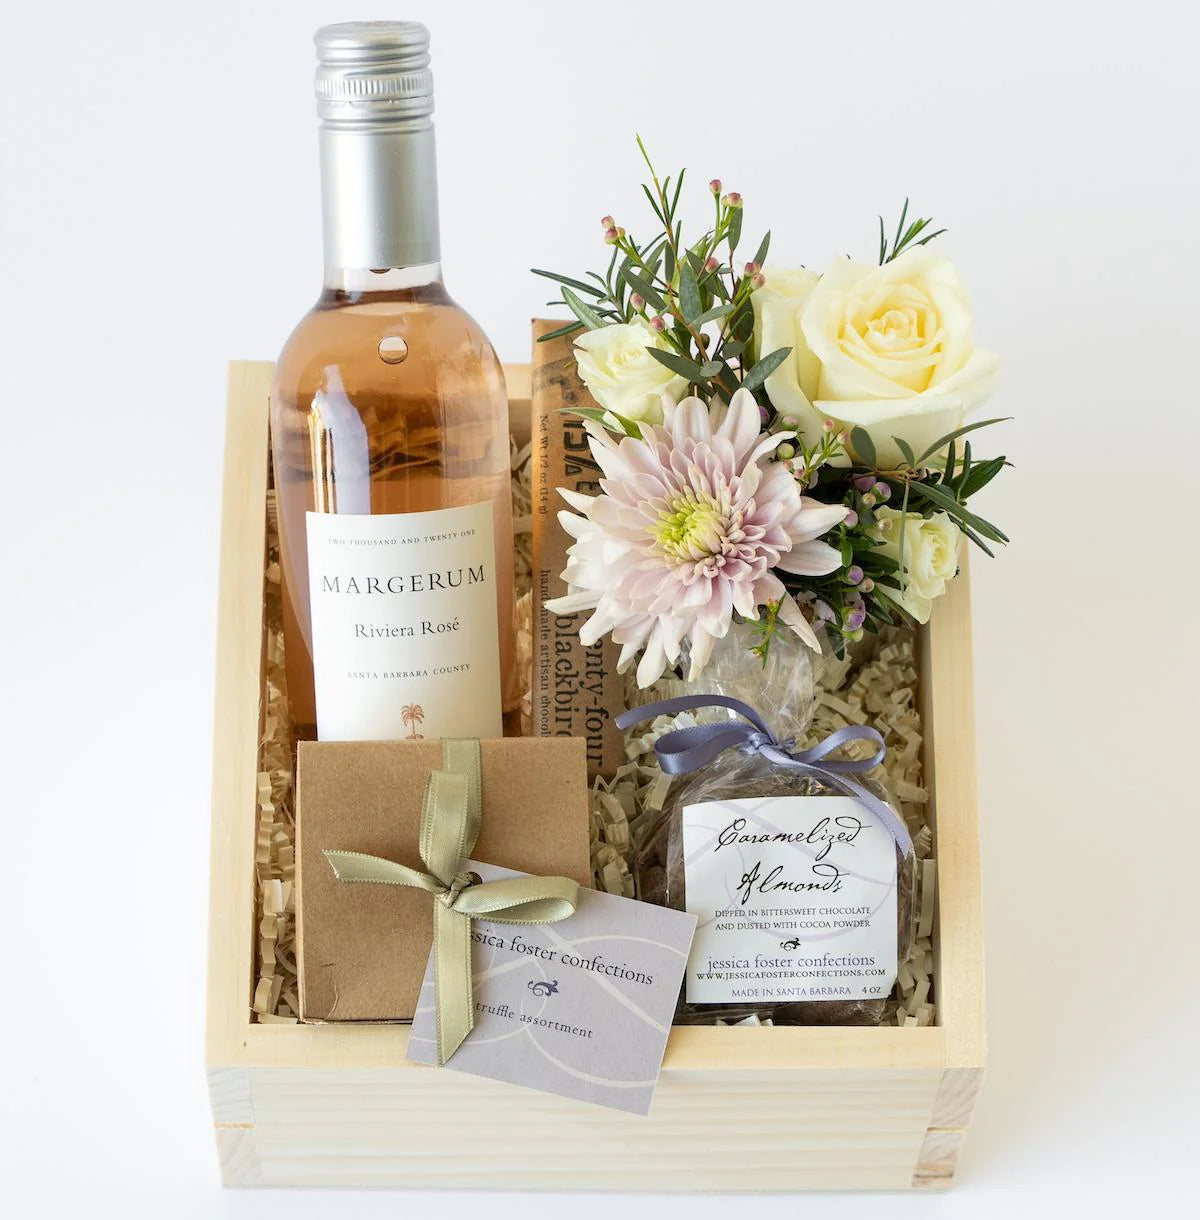 PETITE CHOCOLATE WINE + FLOWERS GIFT BOX with margerum rosé